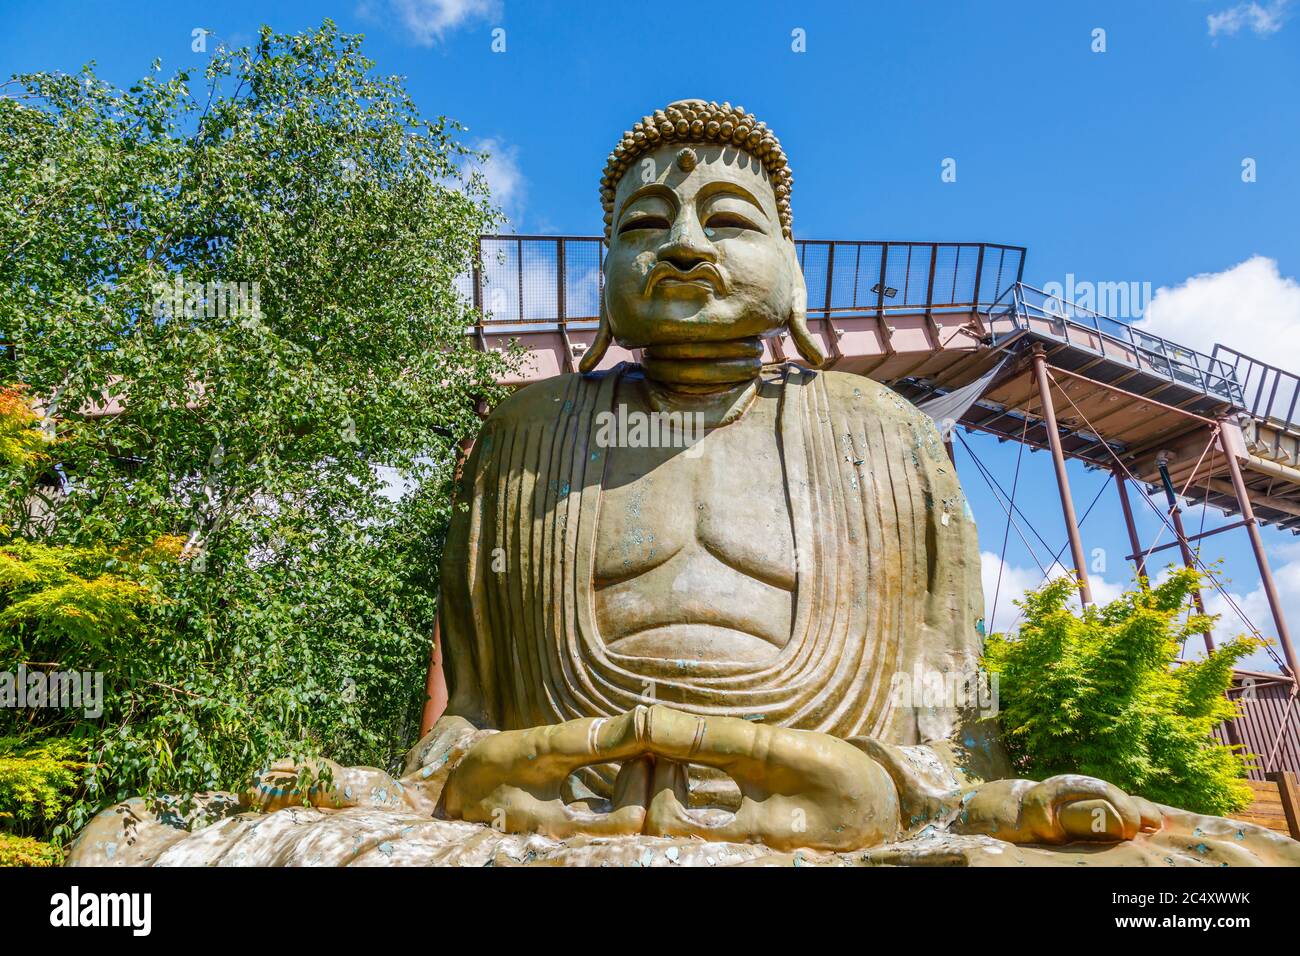 A replica of the Giant Buddha of Kamakura in Japan, Chessington World of Adventures theme park in Surrey, south-east England Stock Photo